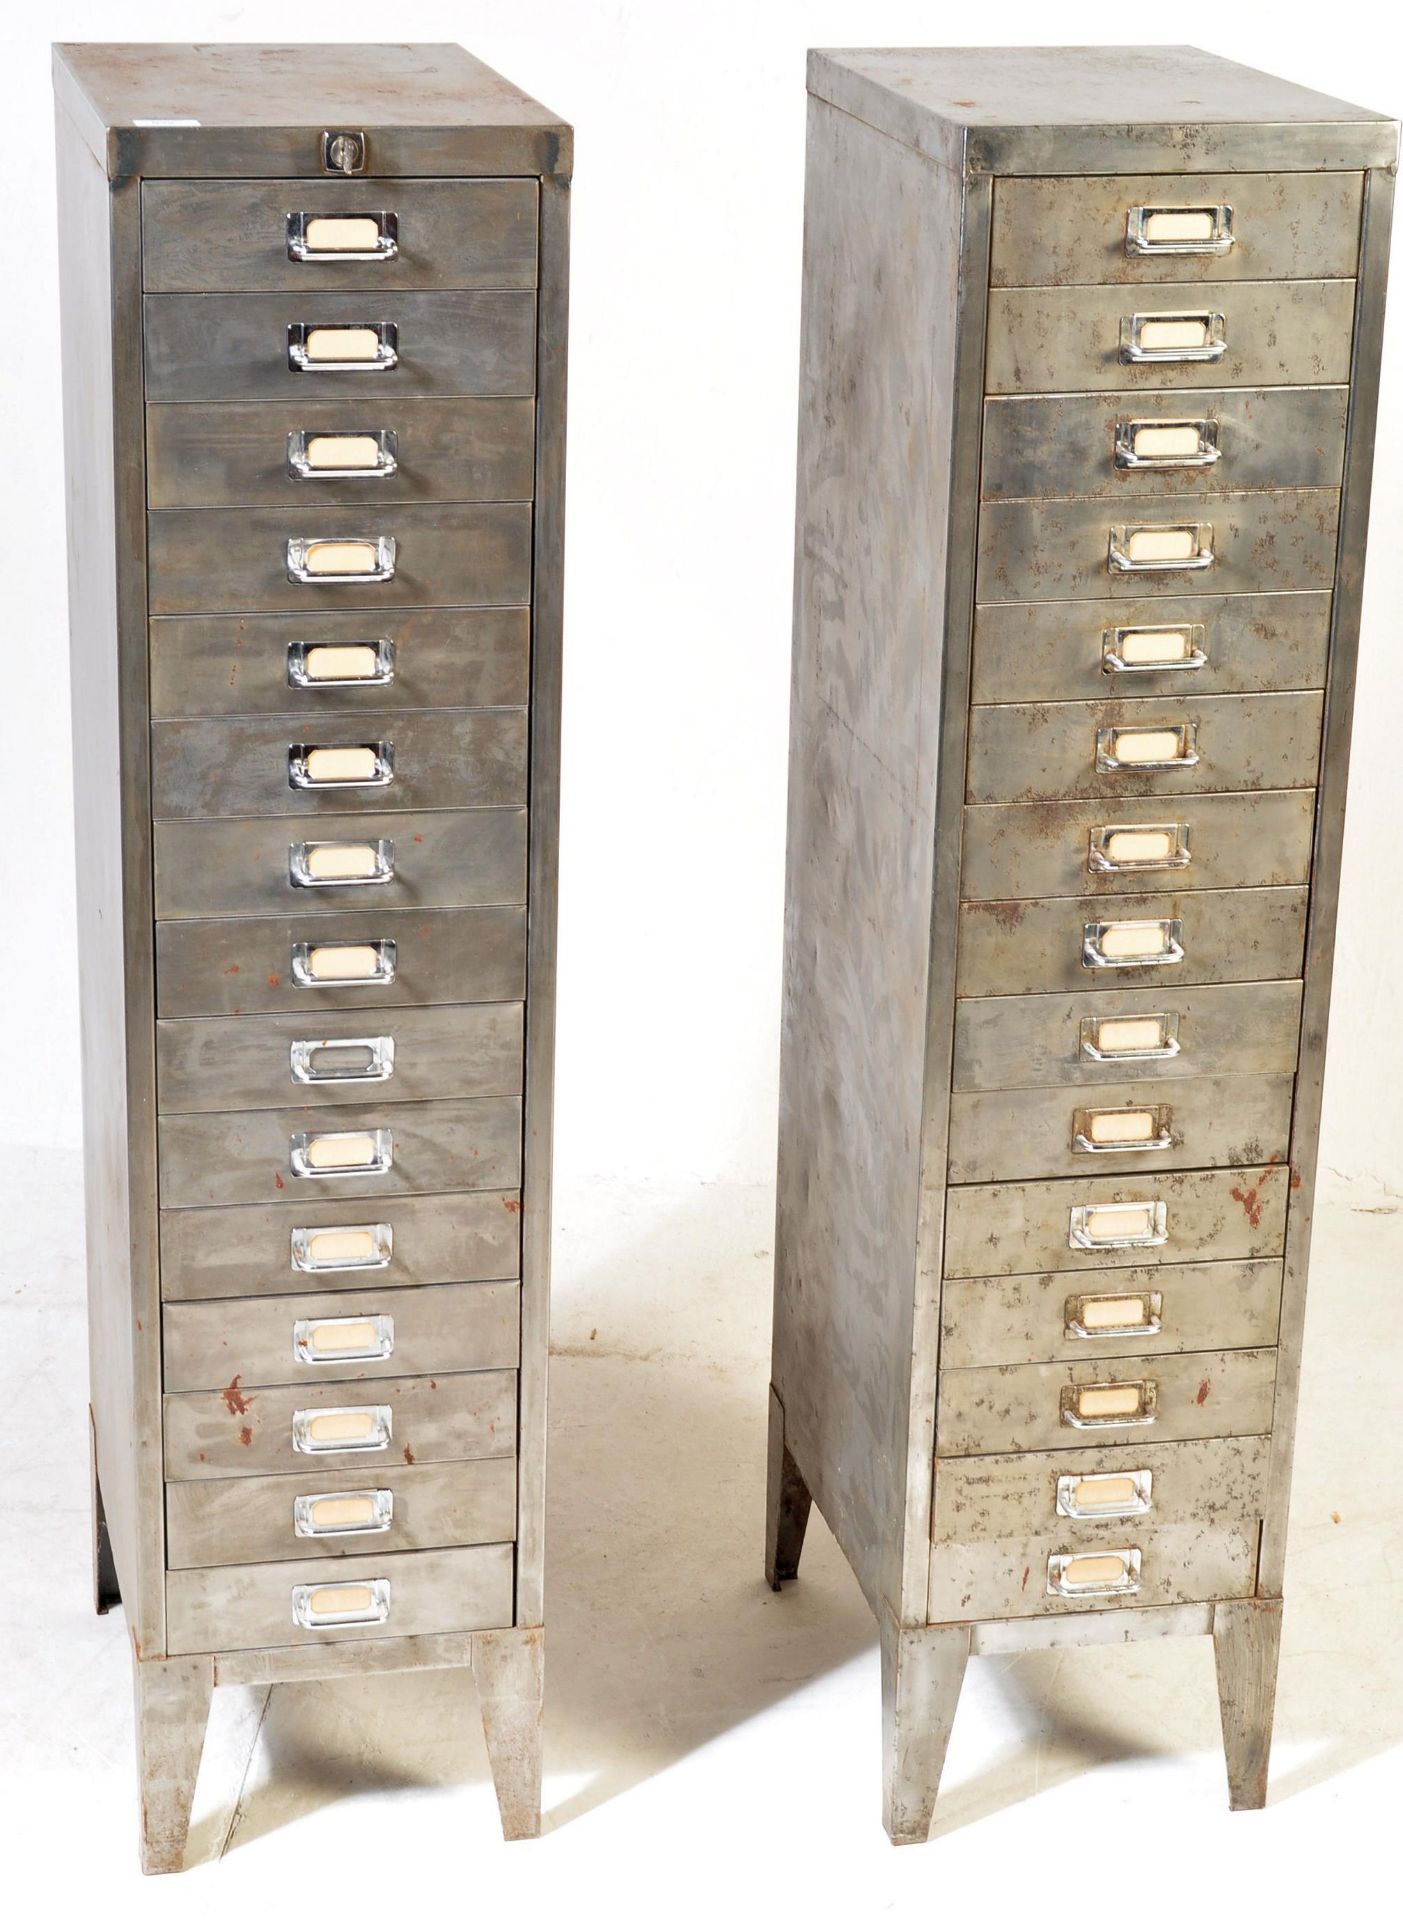 INDUSTRIAL PAIR OF STRIPPED METAL 15 DRAWER FILING CABINETS - Image 2 of 9